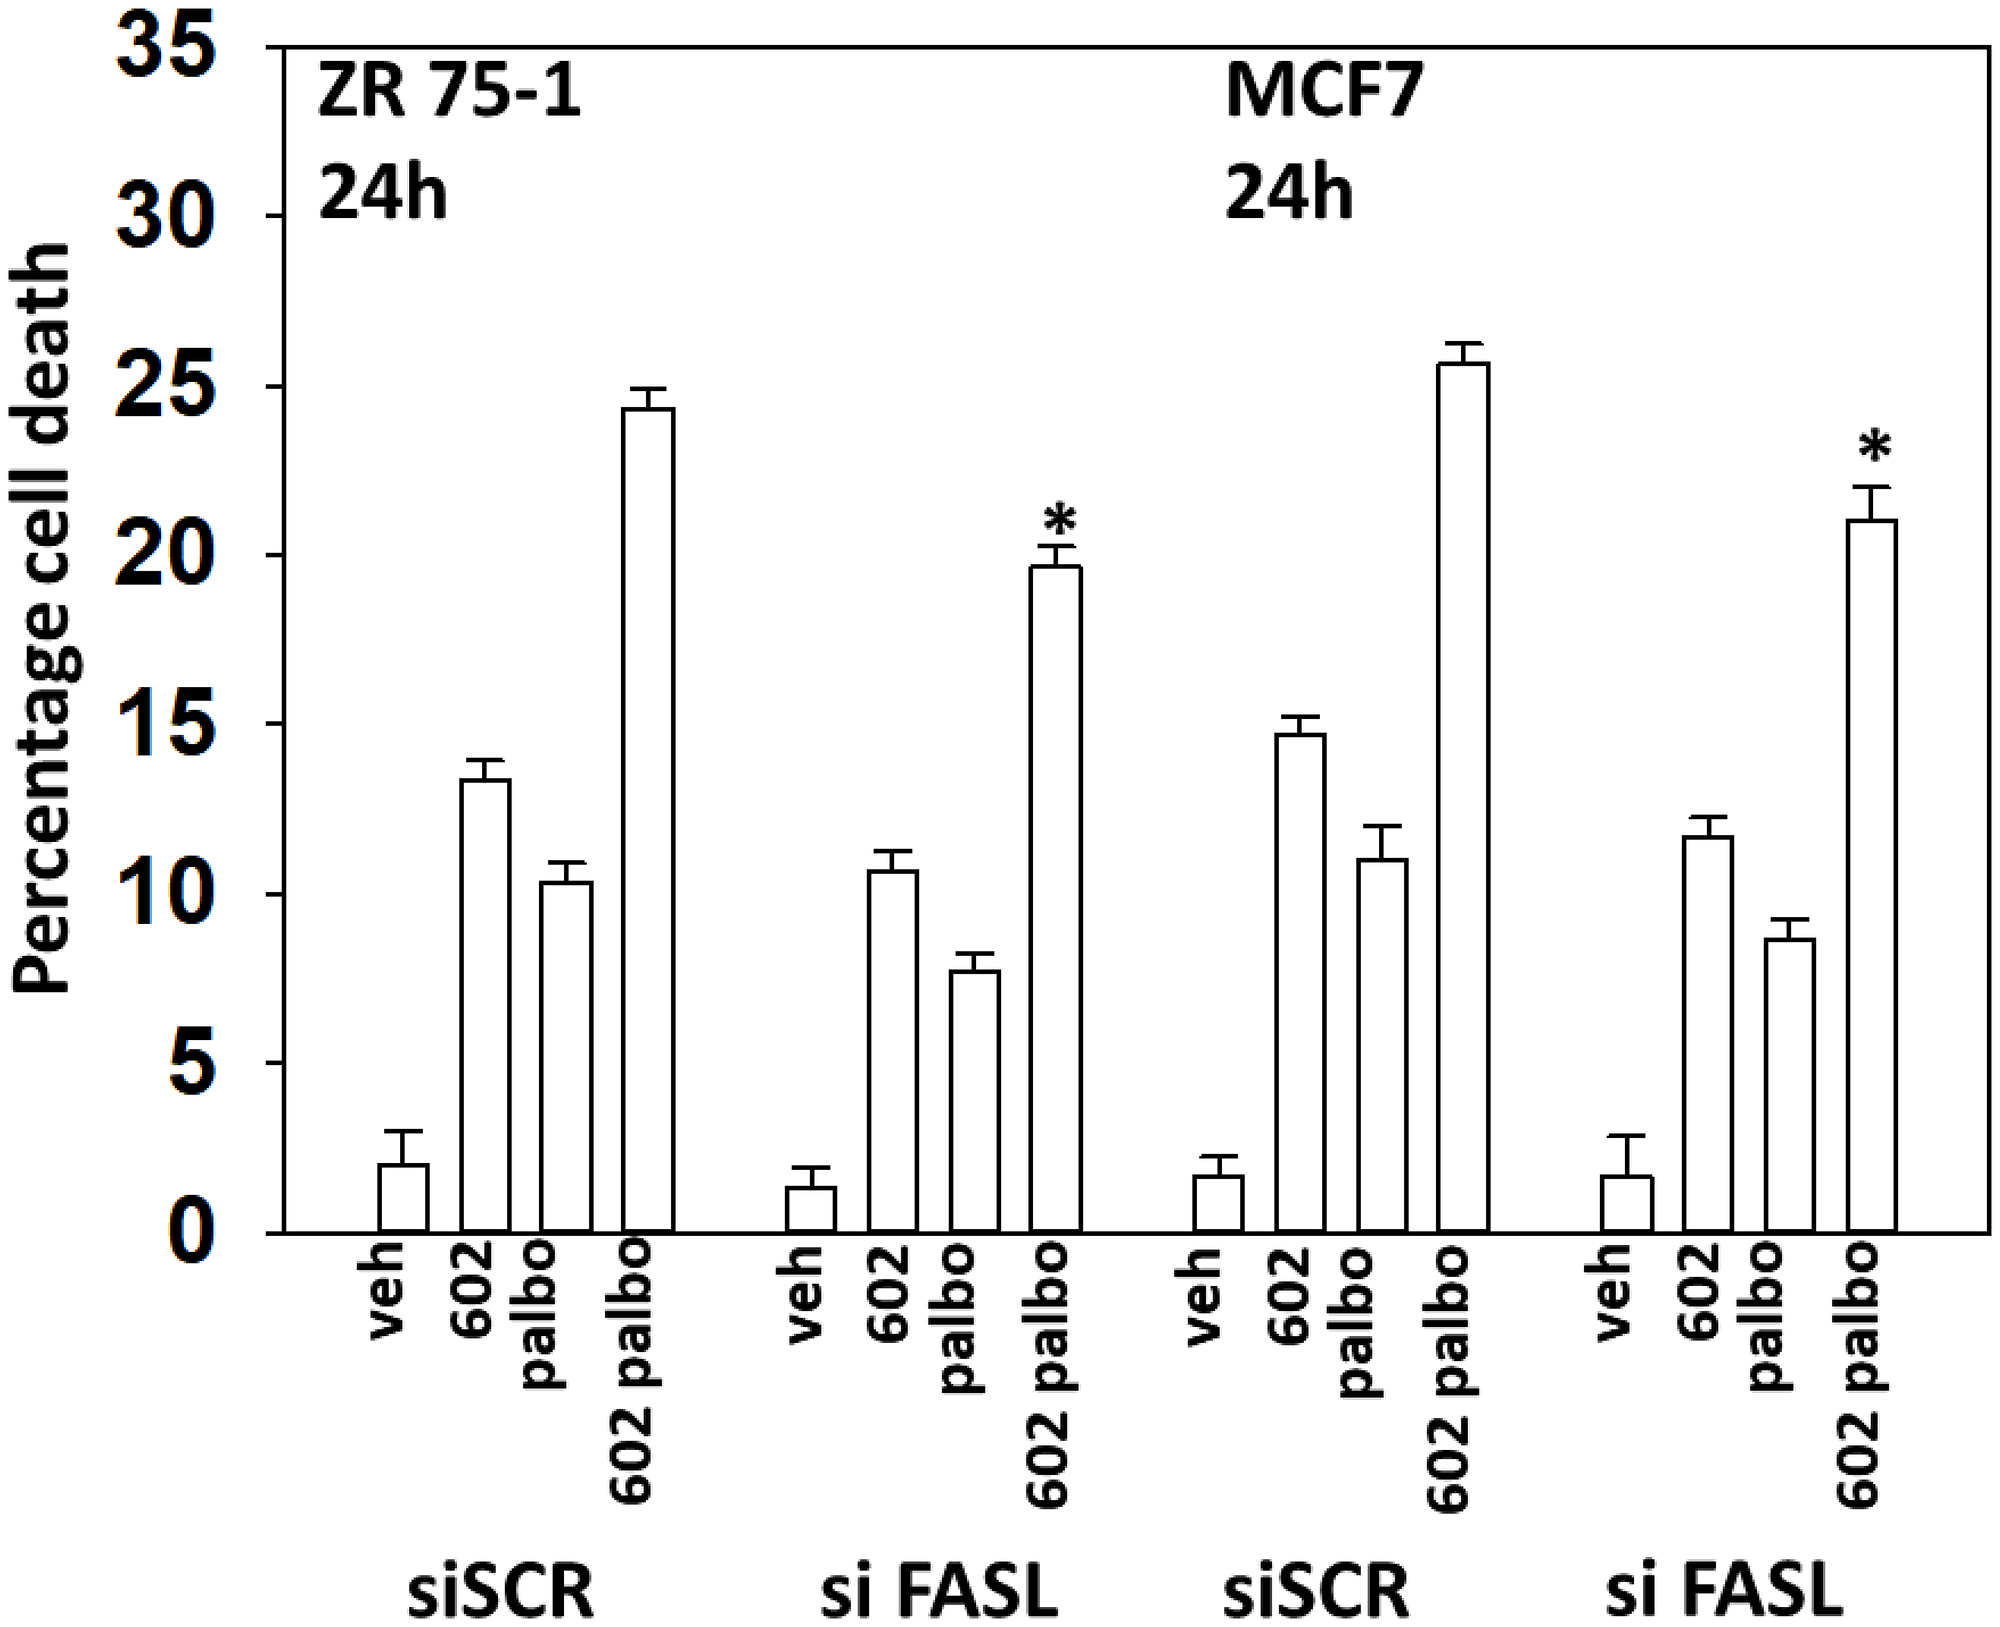 Drug combination-induced FAS-L expression plays a role in the toxic interaction between GZ17-6.02 and palbociclib.